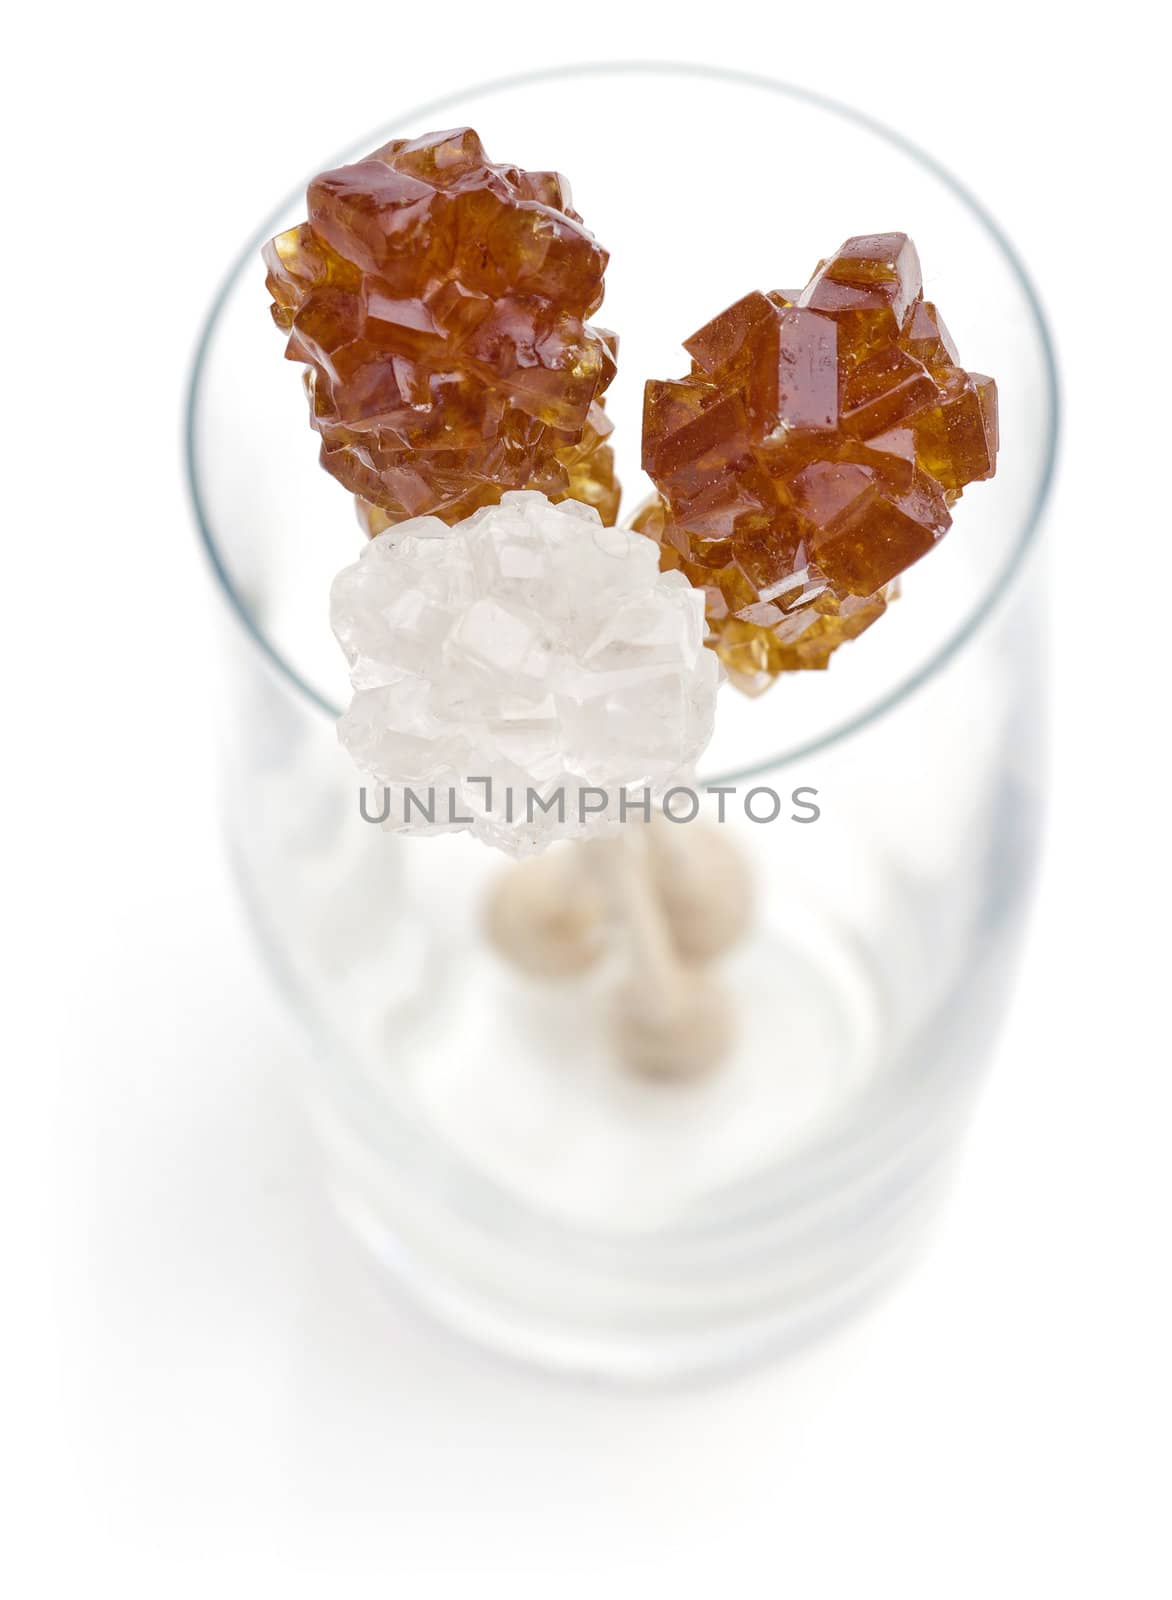 Candy brown and white sugar on a sticks in glass. Soft focus. With white background.